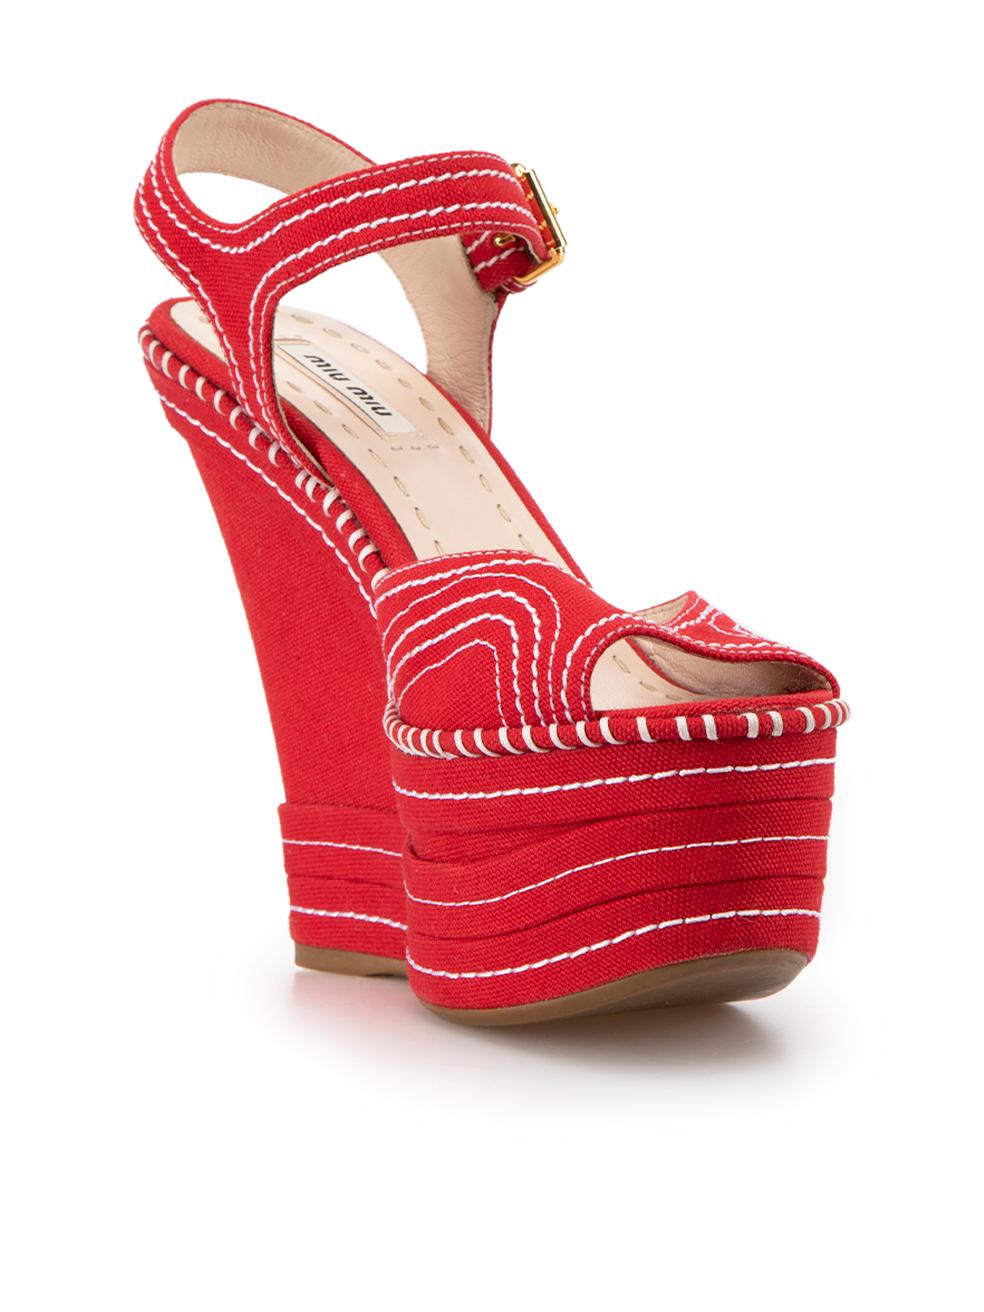 CONDITION is Very good. Minimal wear to shoes is evident. Minimal wear to the left shoe with small mark to the left-side on this used Miu Miu designer resale item.



Details


Red

Canvas

Platform wedge sandals

Peep-toe

White contrast